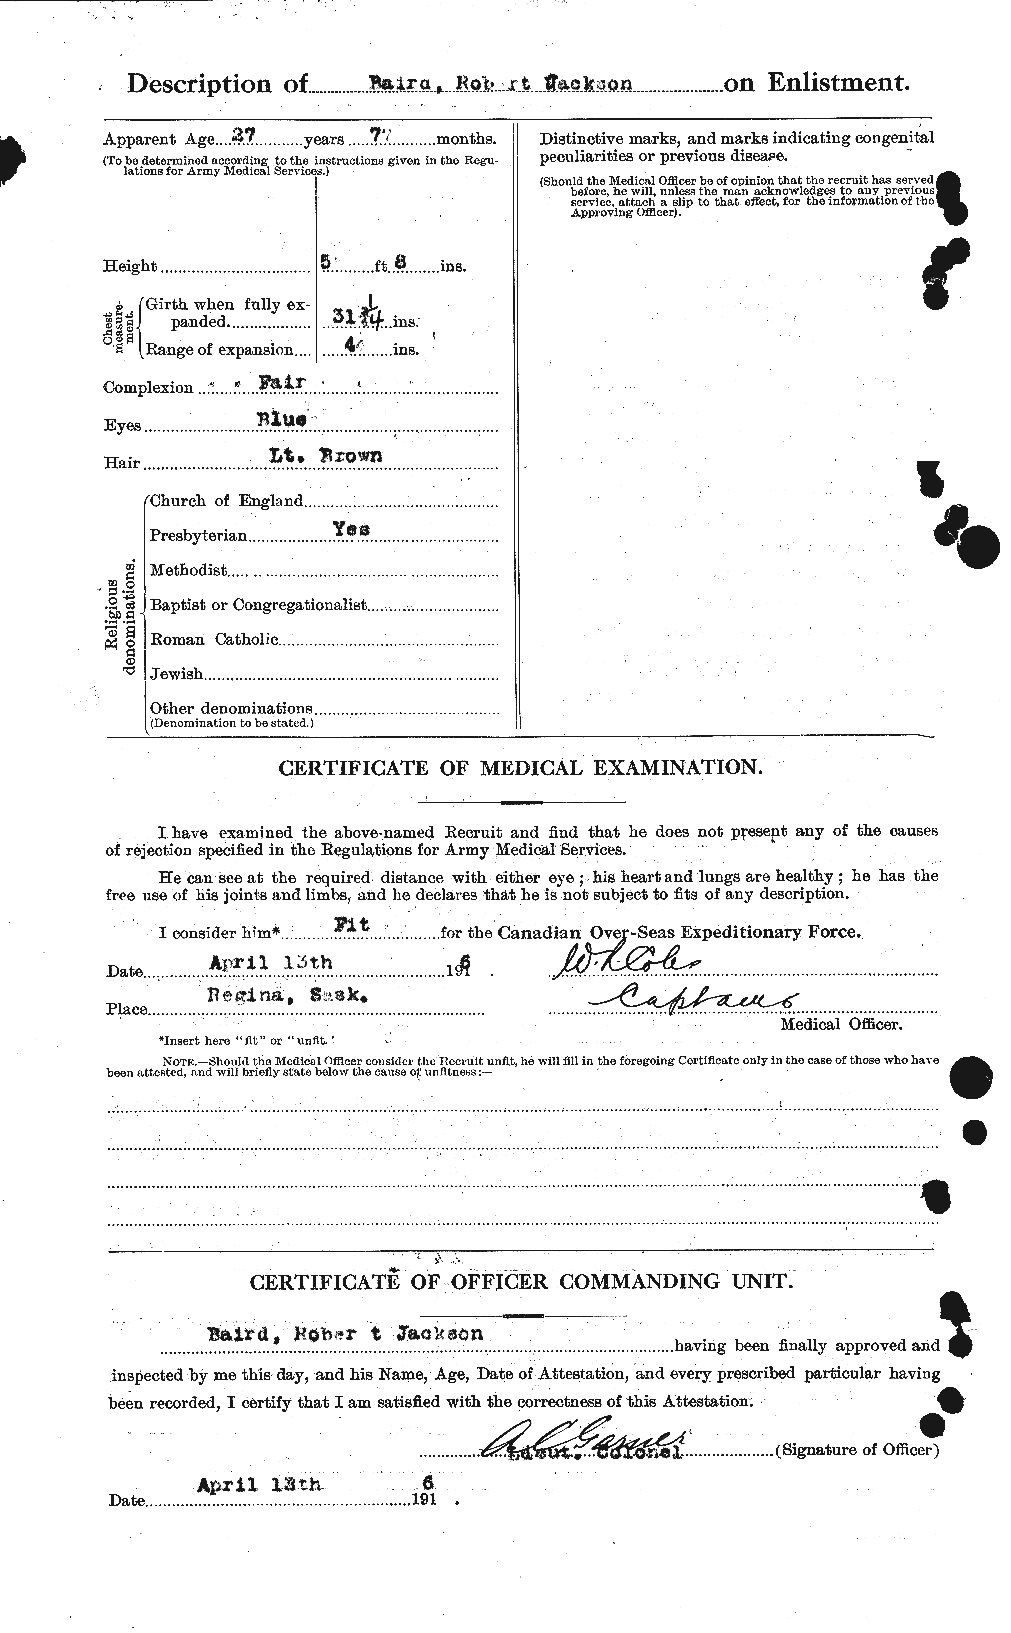 Personnel Records of the First World War - CEF 226565b